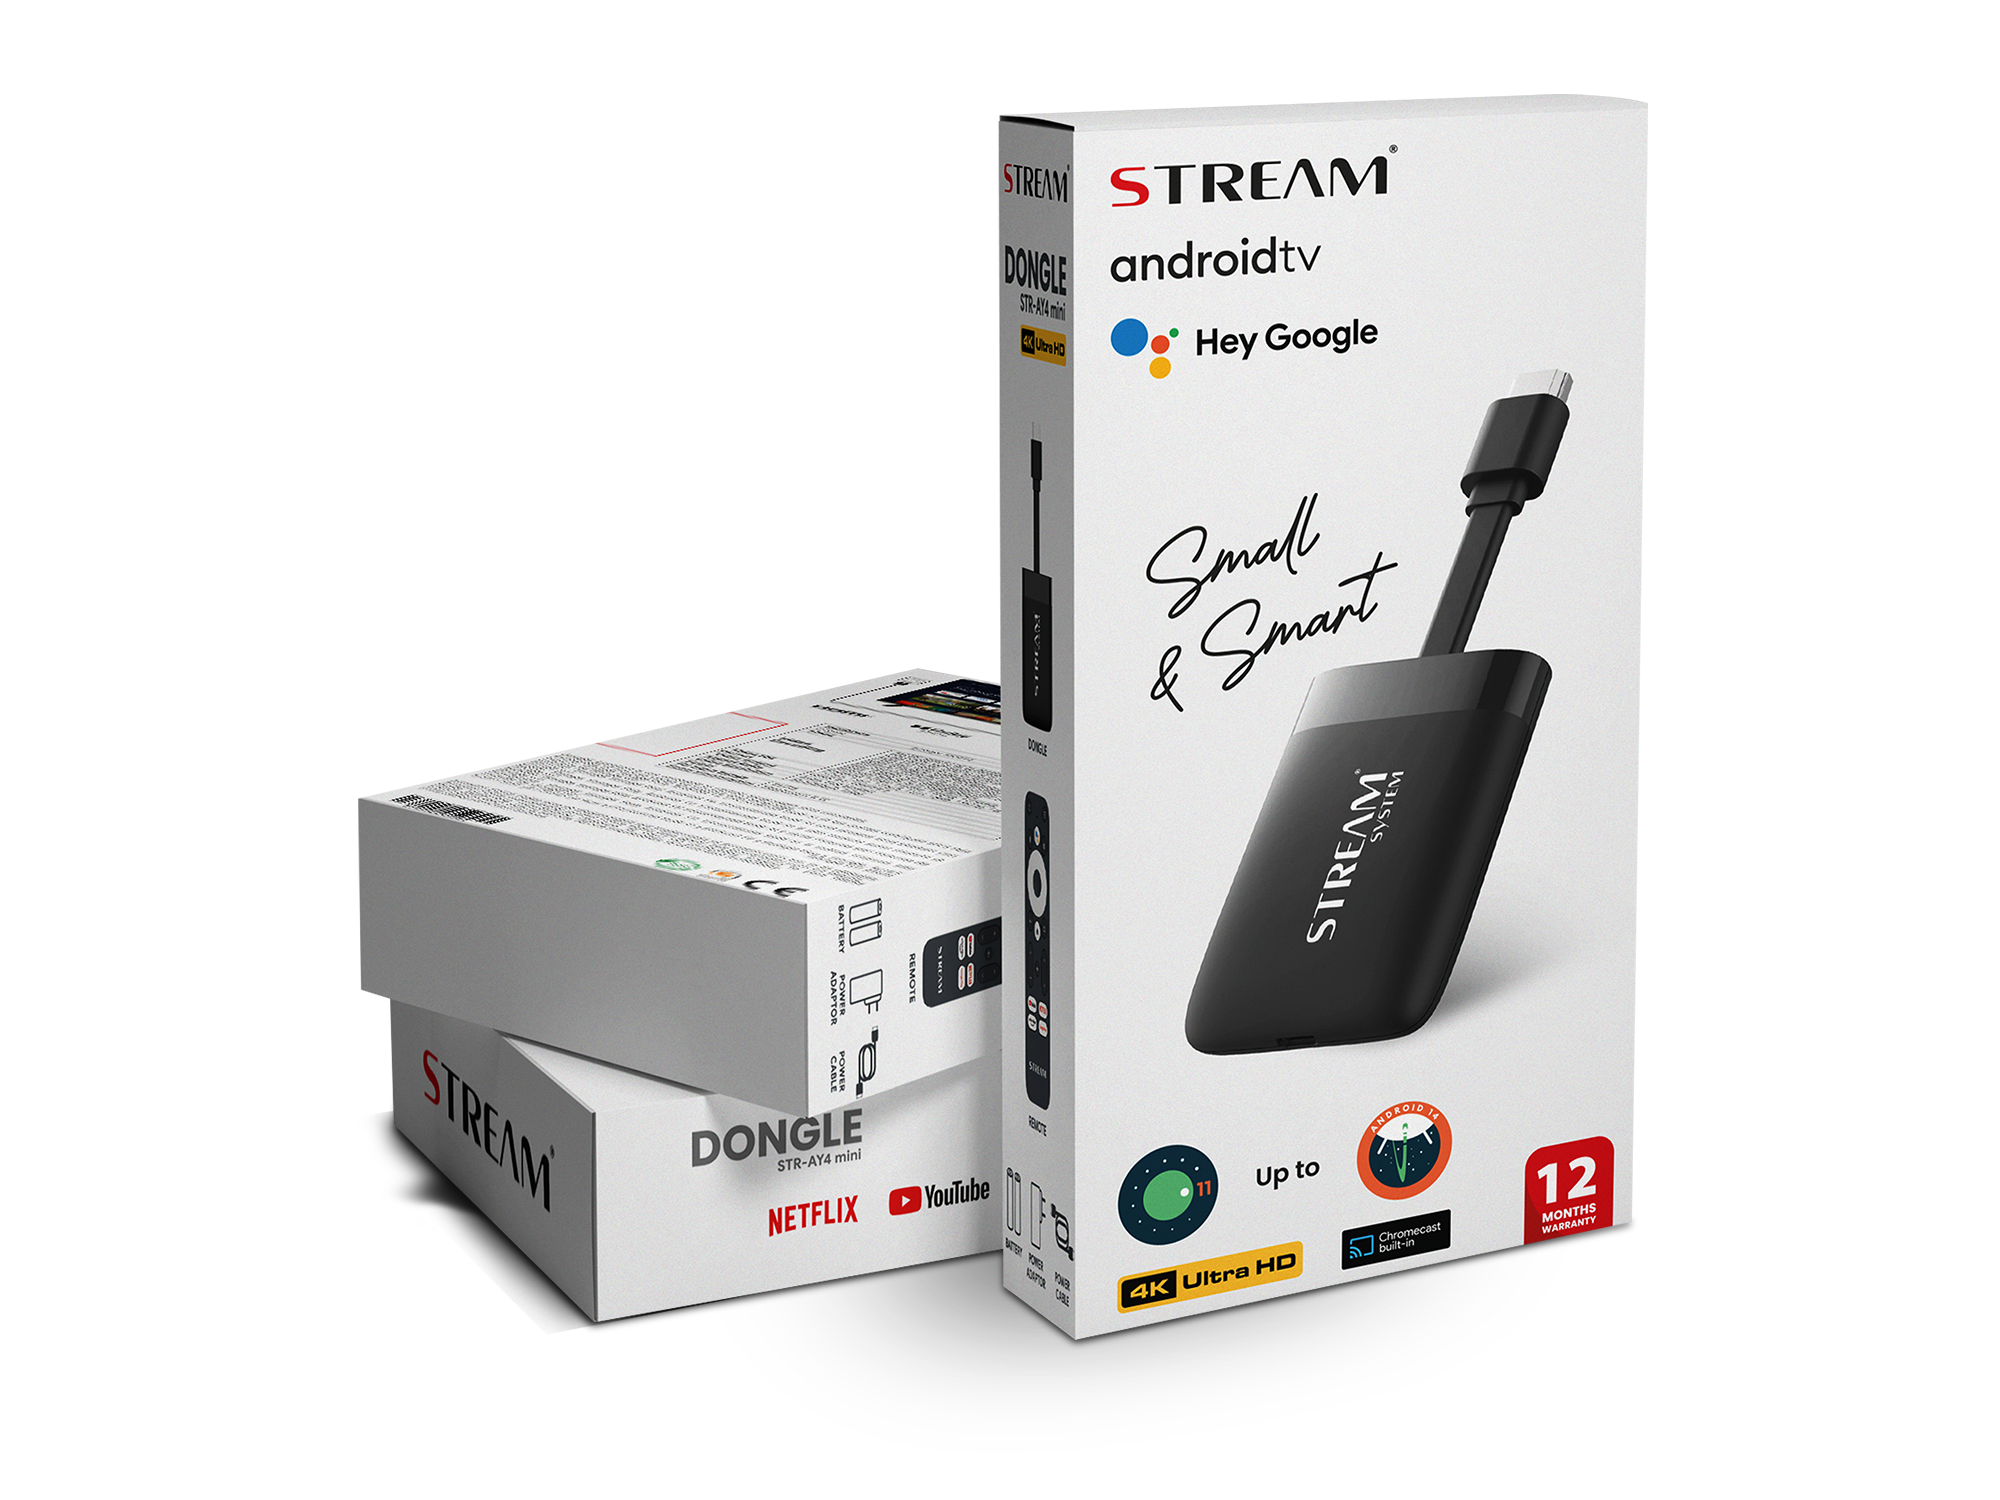 Dongle Android TV STR AY4 Mini packaging